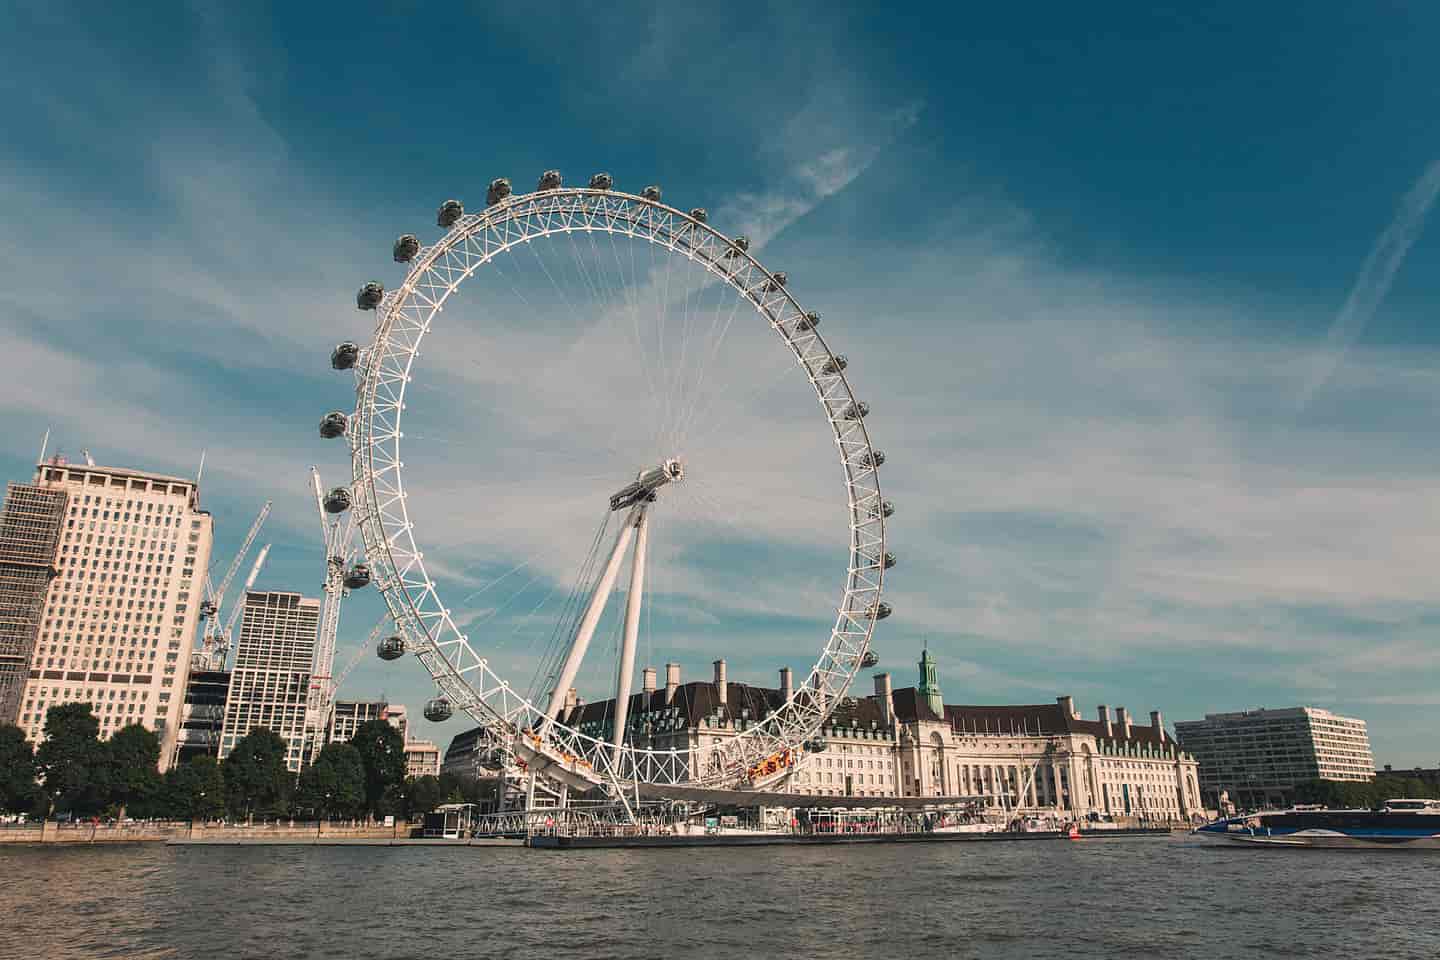 Student Accommodation in London - A view of the London Eye and South Bank from the River Thames